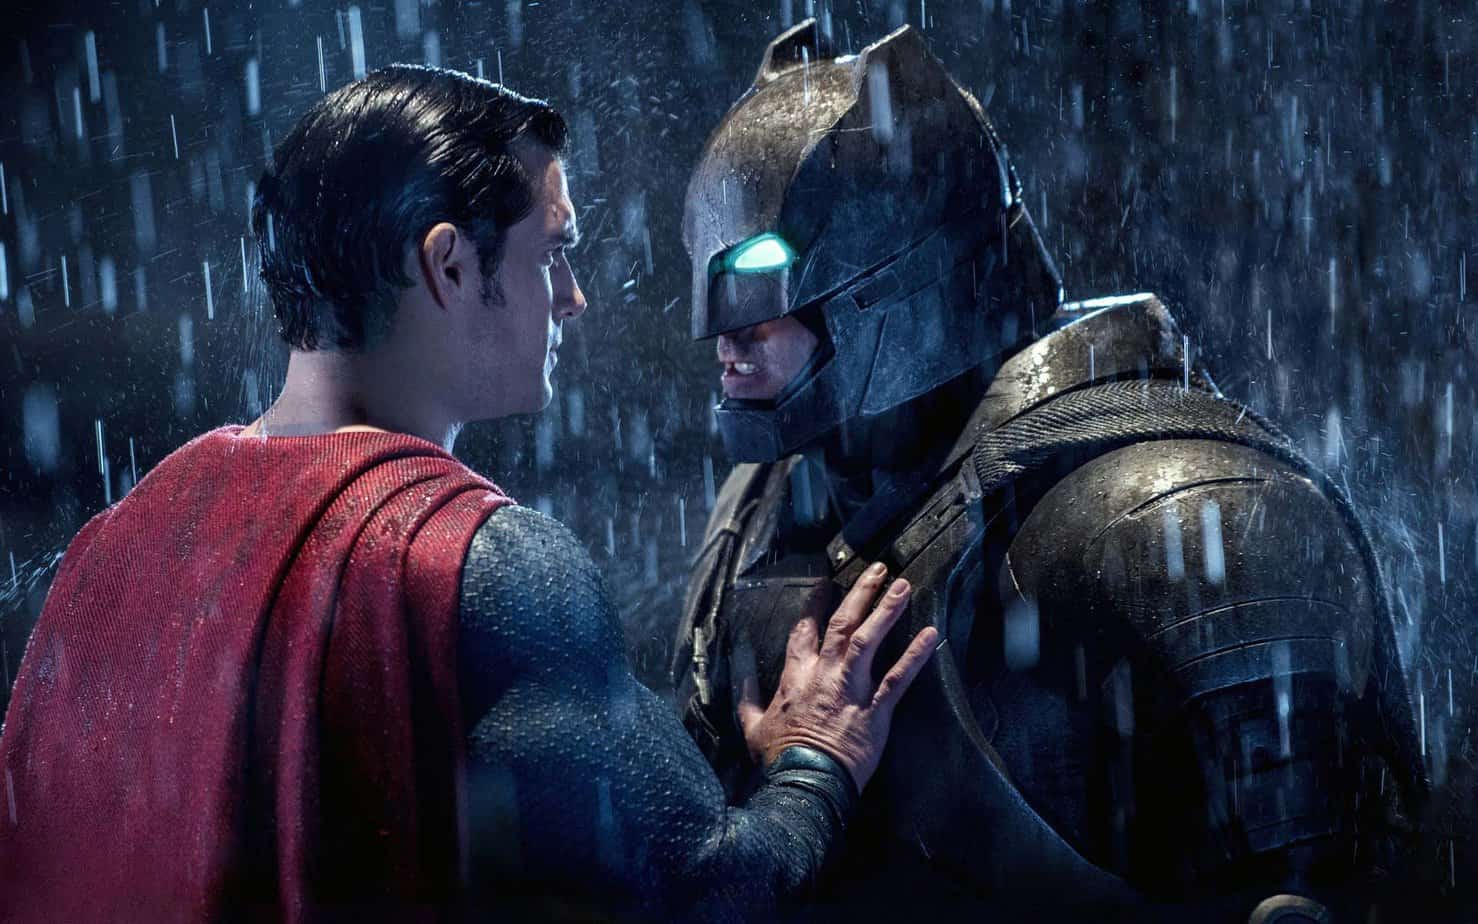 "Batman v. Superman" Zack Snyder's Full Director's Commentary is Available Now